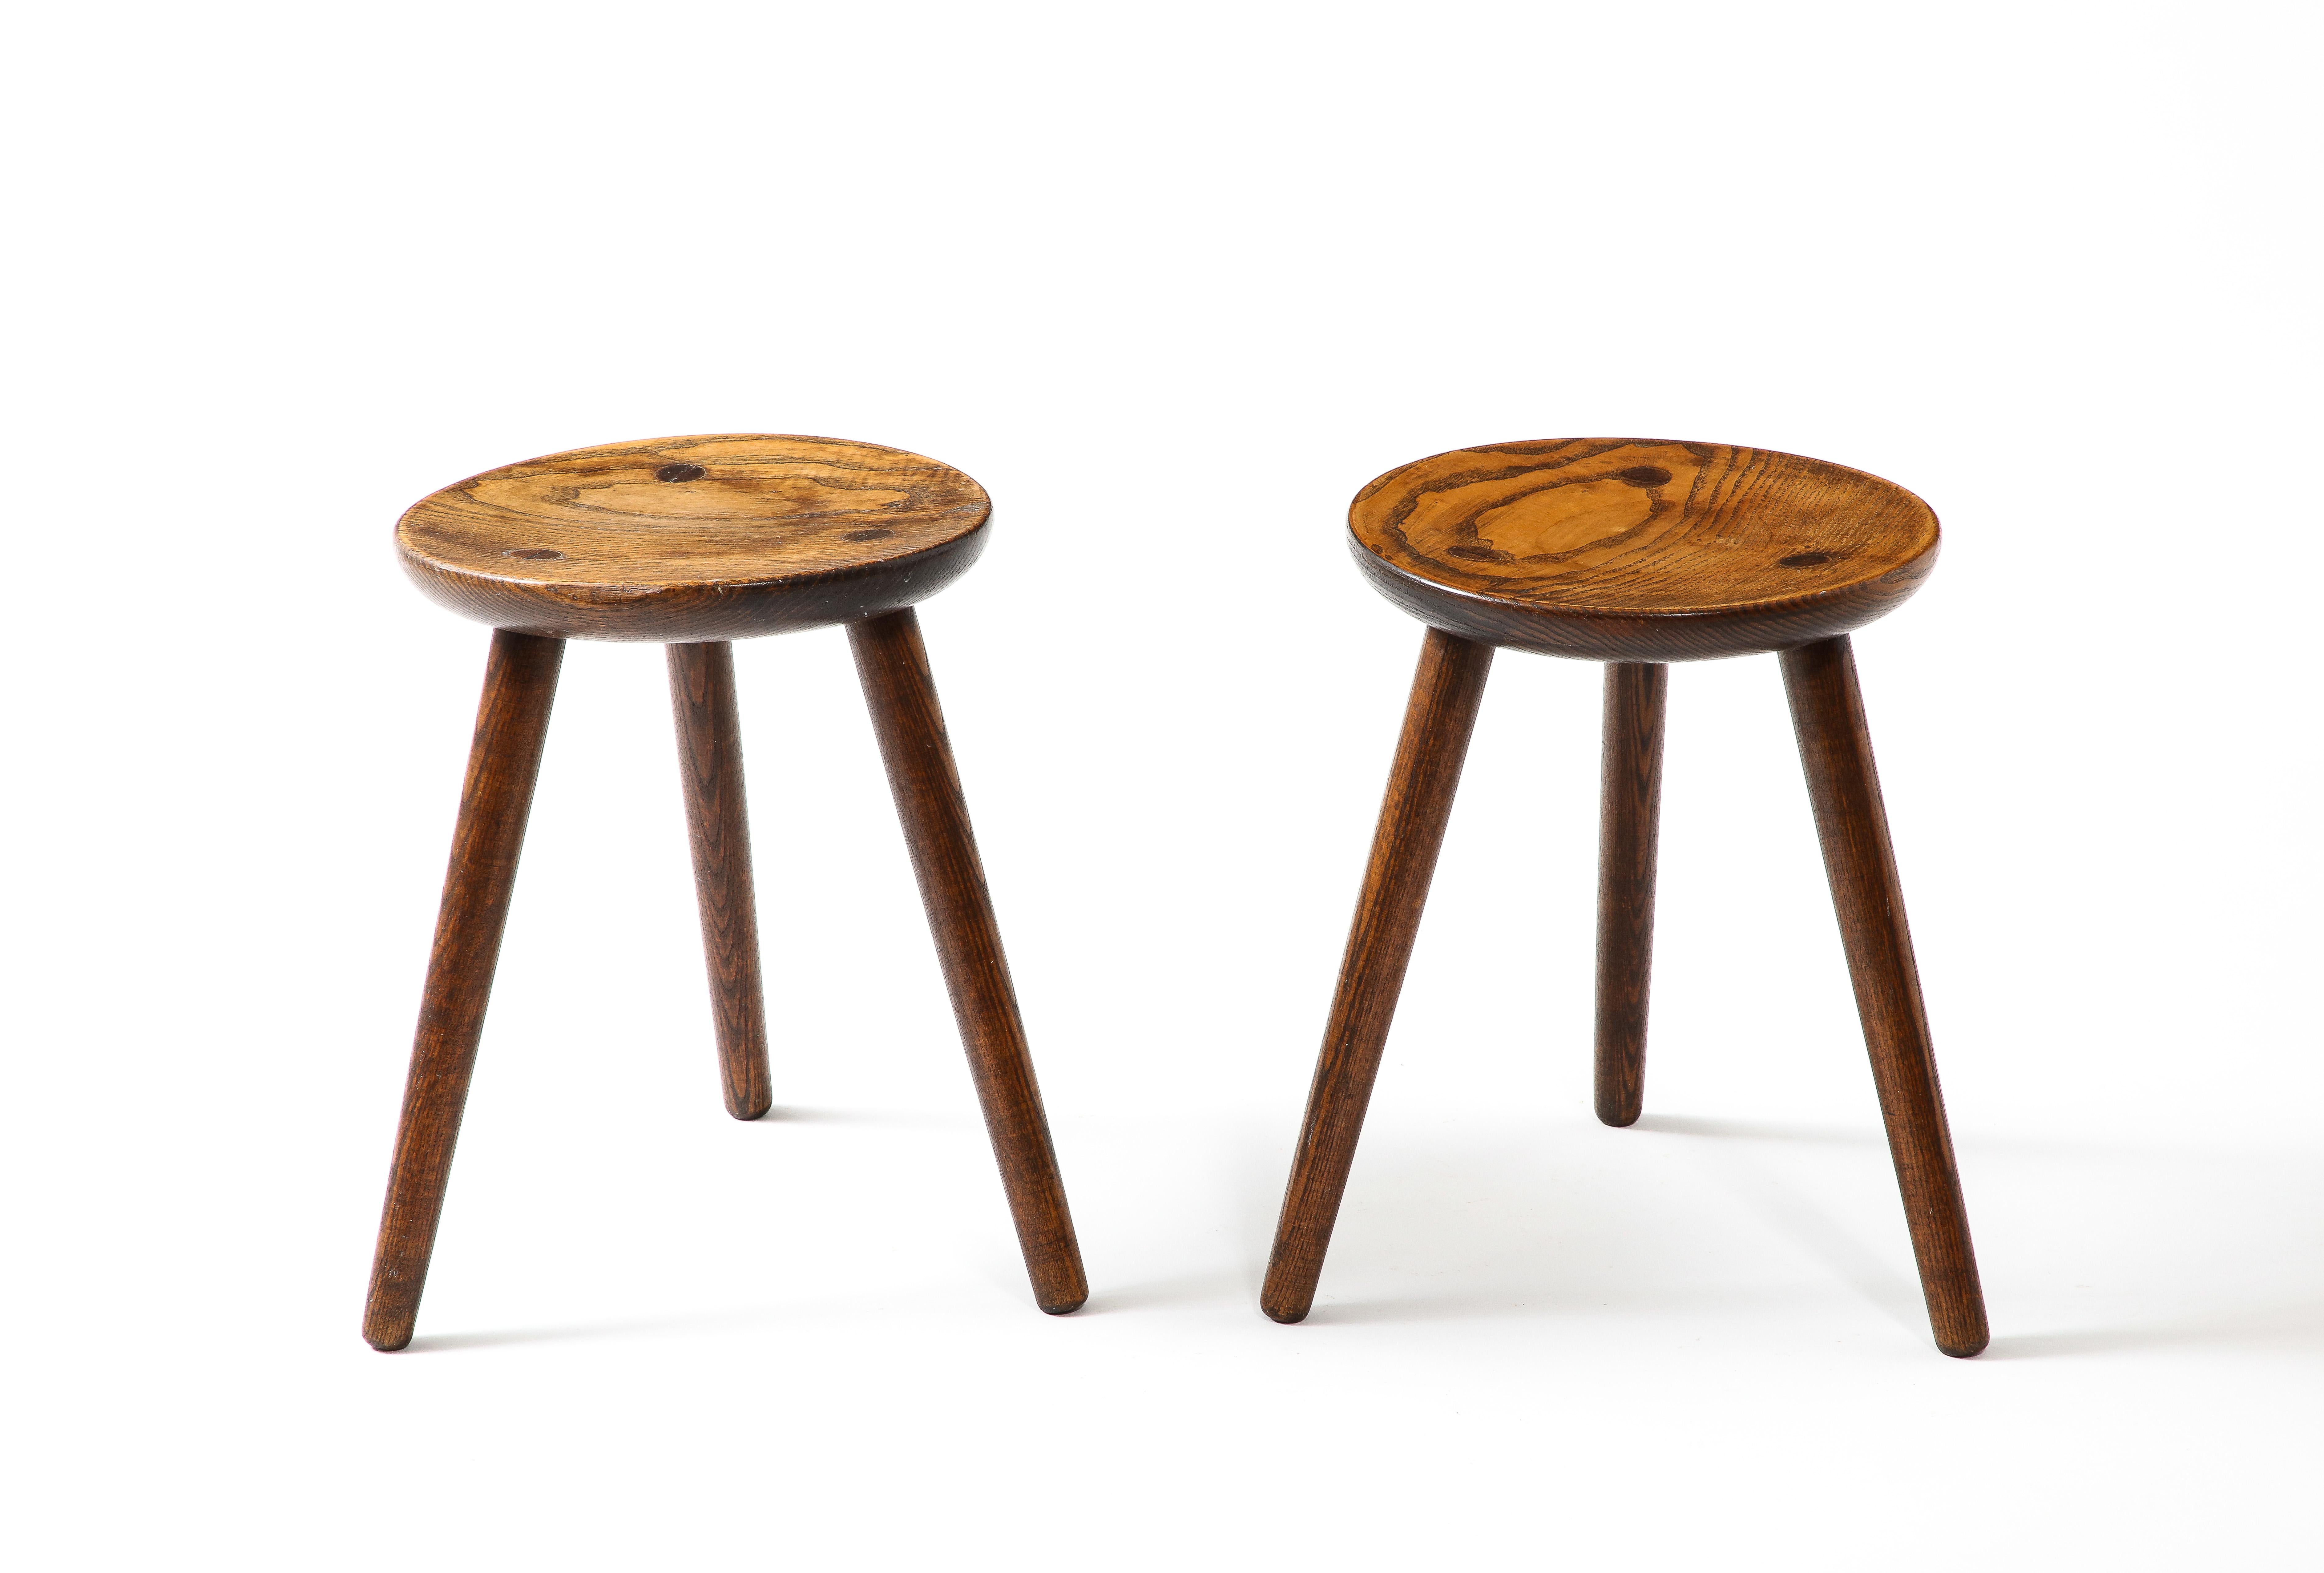 Pair of Tripod Stools in the Manner of Perriand, France 1950s For Sale 2